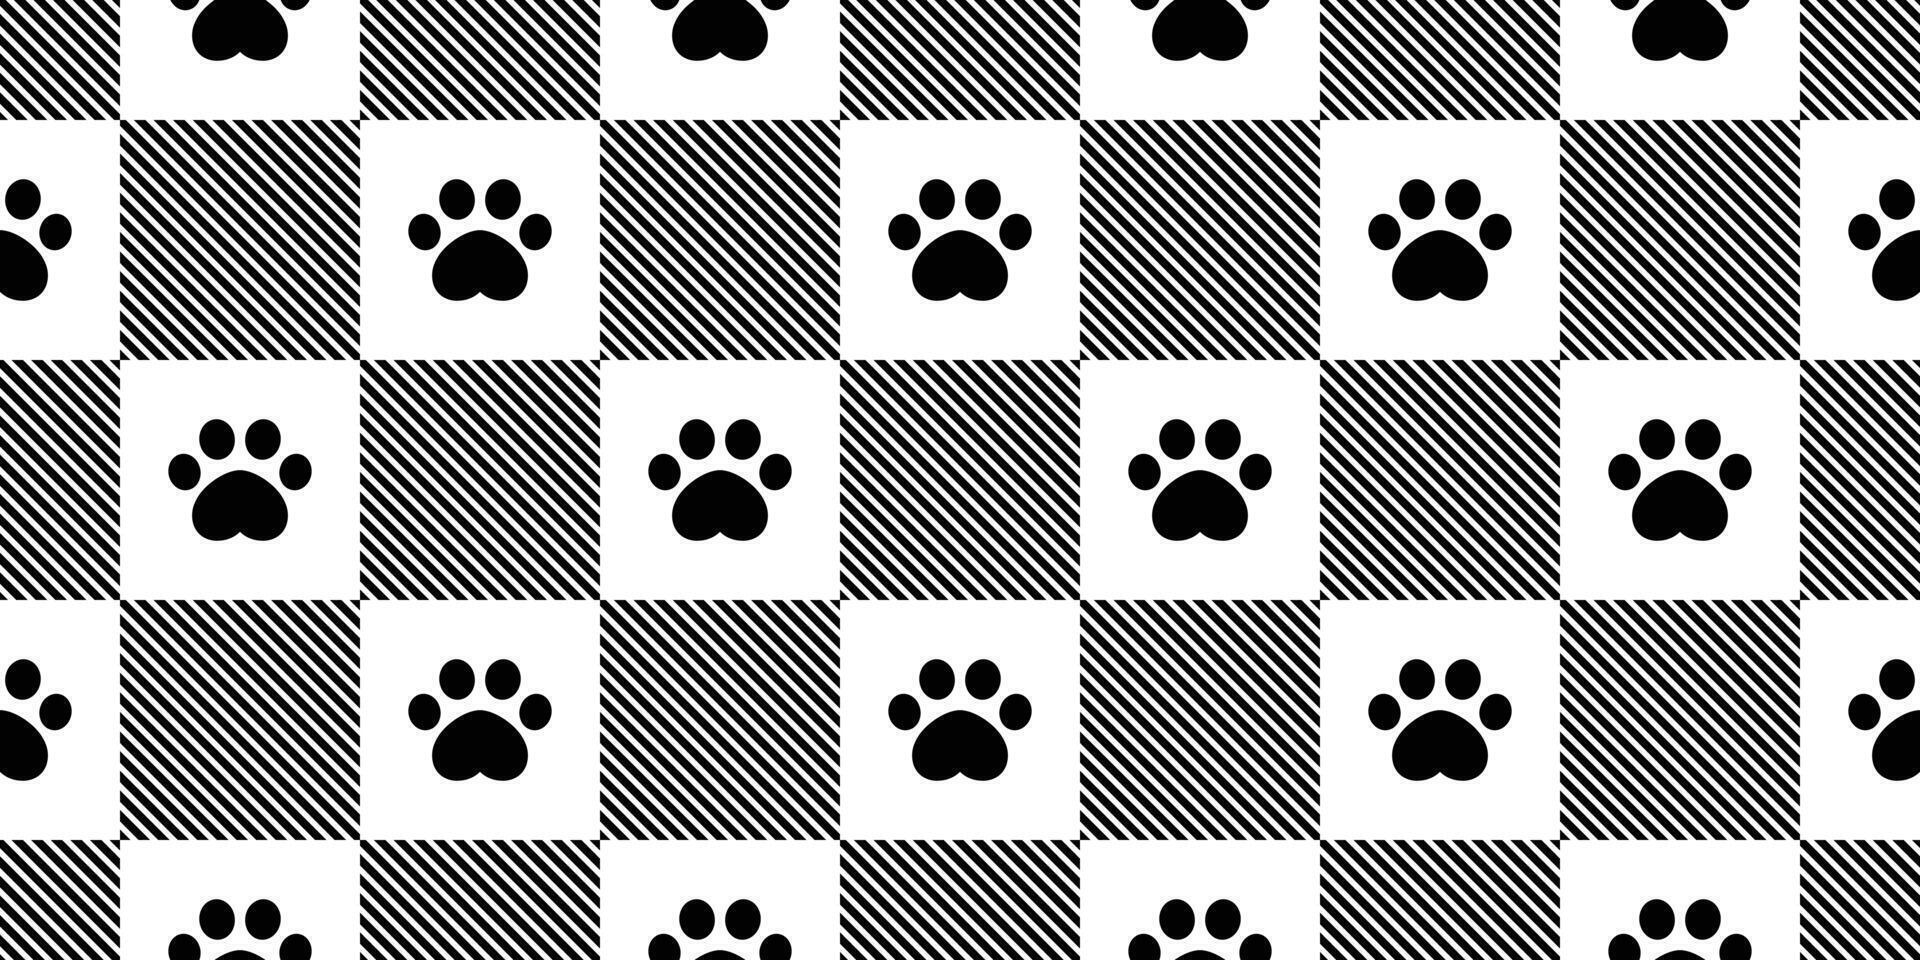 dog paw seamless pattern footprint checked cat french bulldog puppy pet cartoon repeat wallpaper tile background scarf isolated illustration doodle design vector